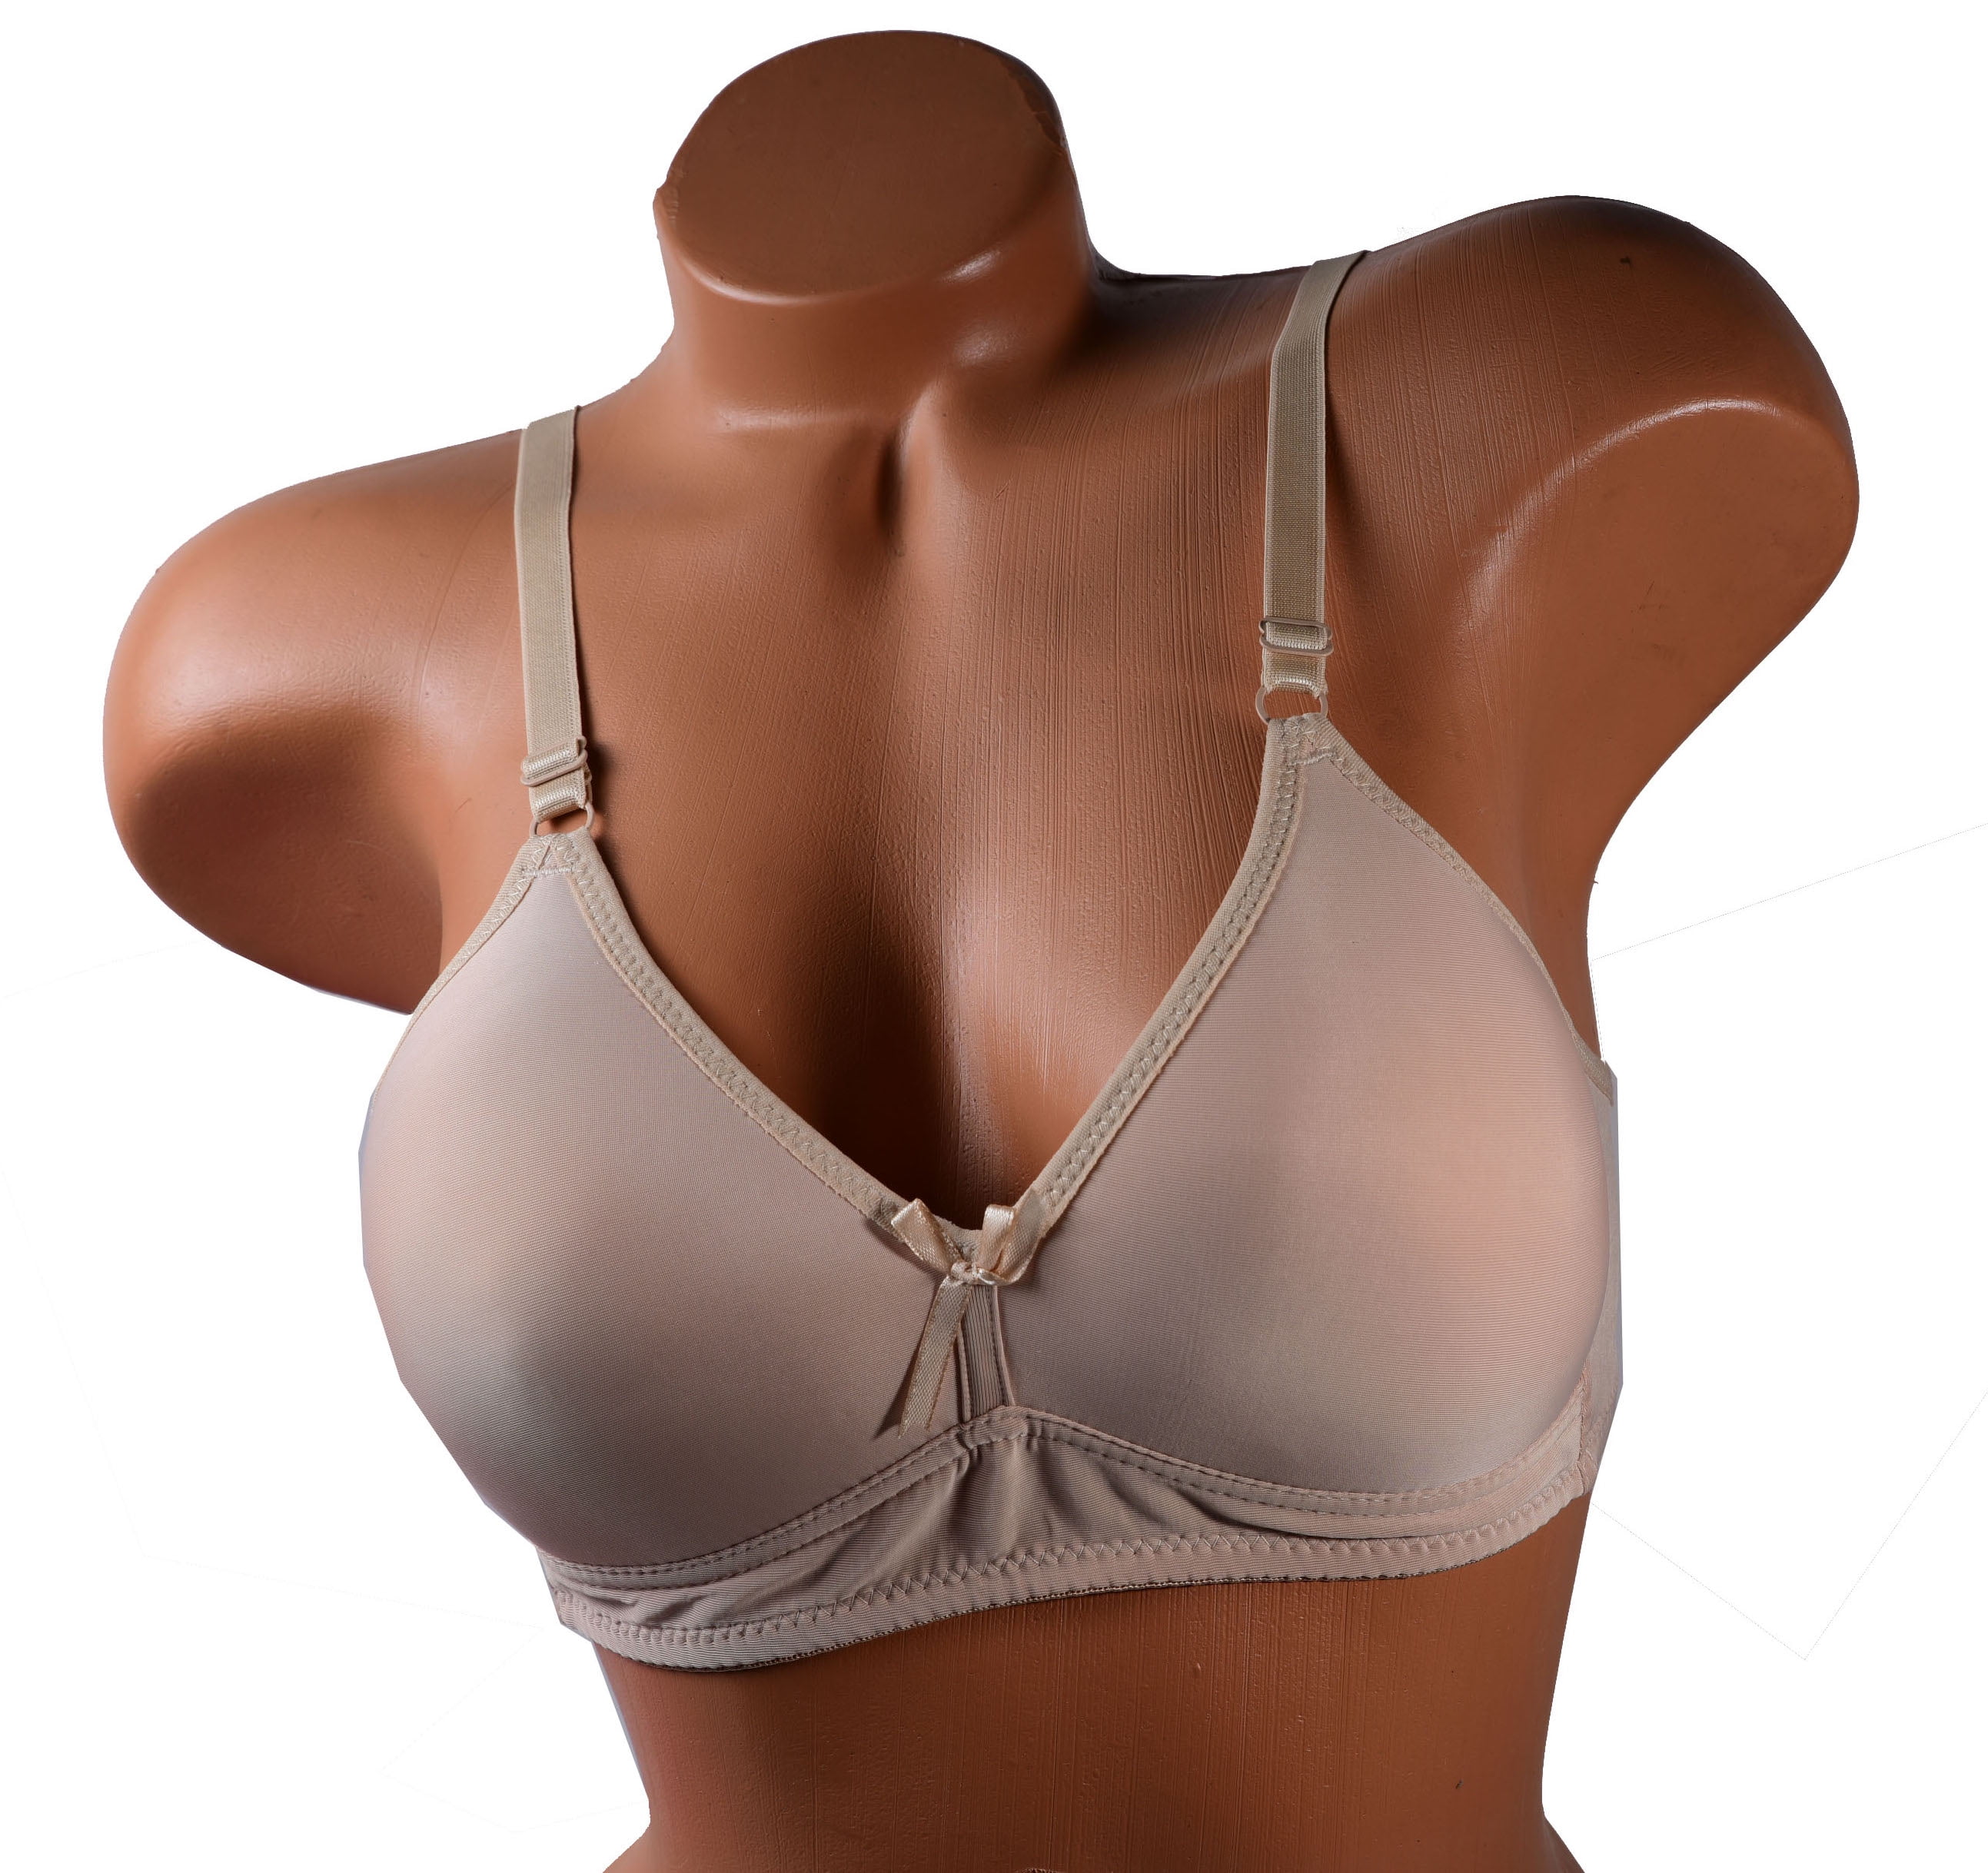 Women Bras 6 pack of Basic No Wire Free Wireless Bra B cup C cup 40C (6819)  